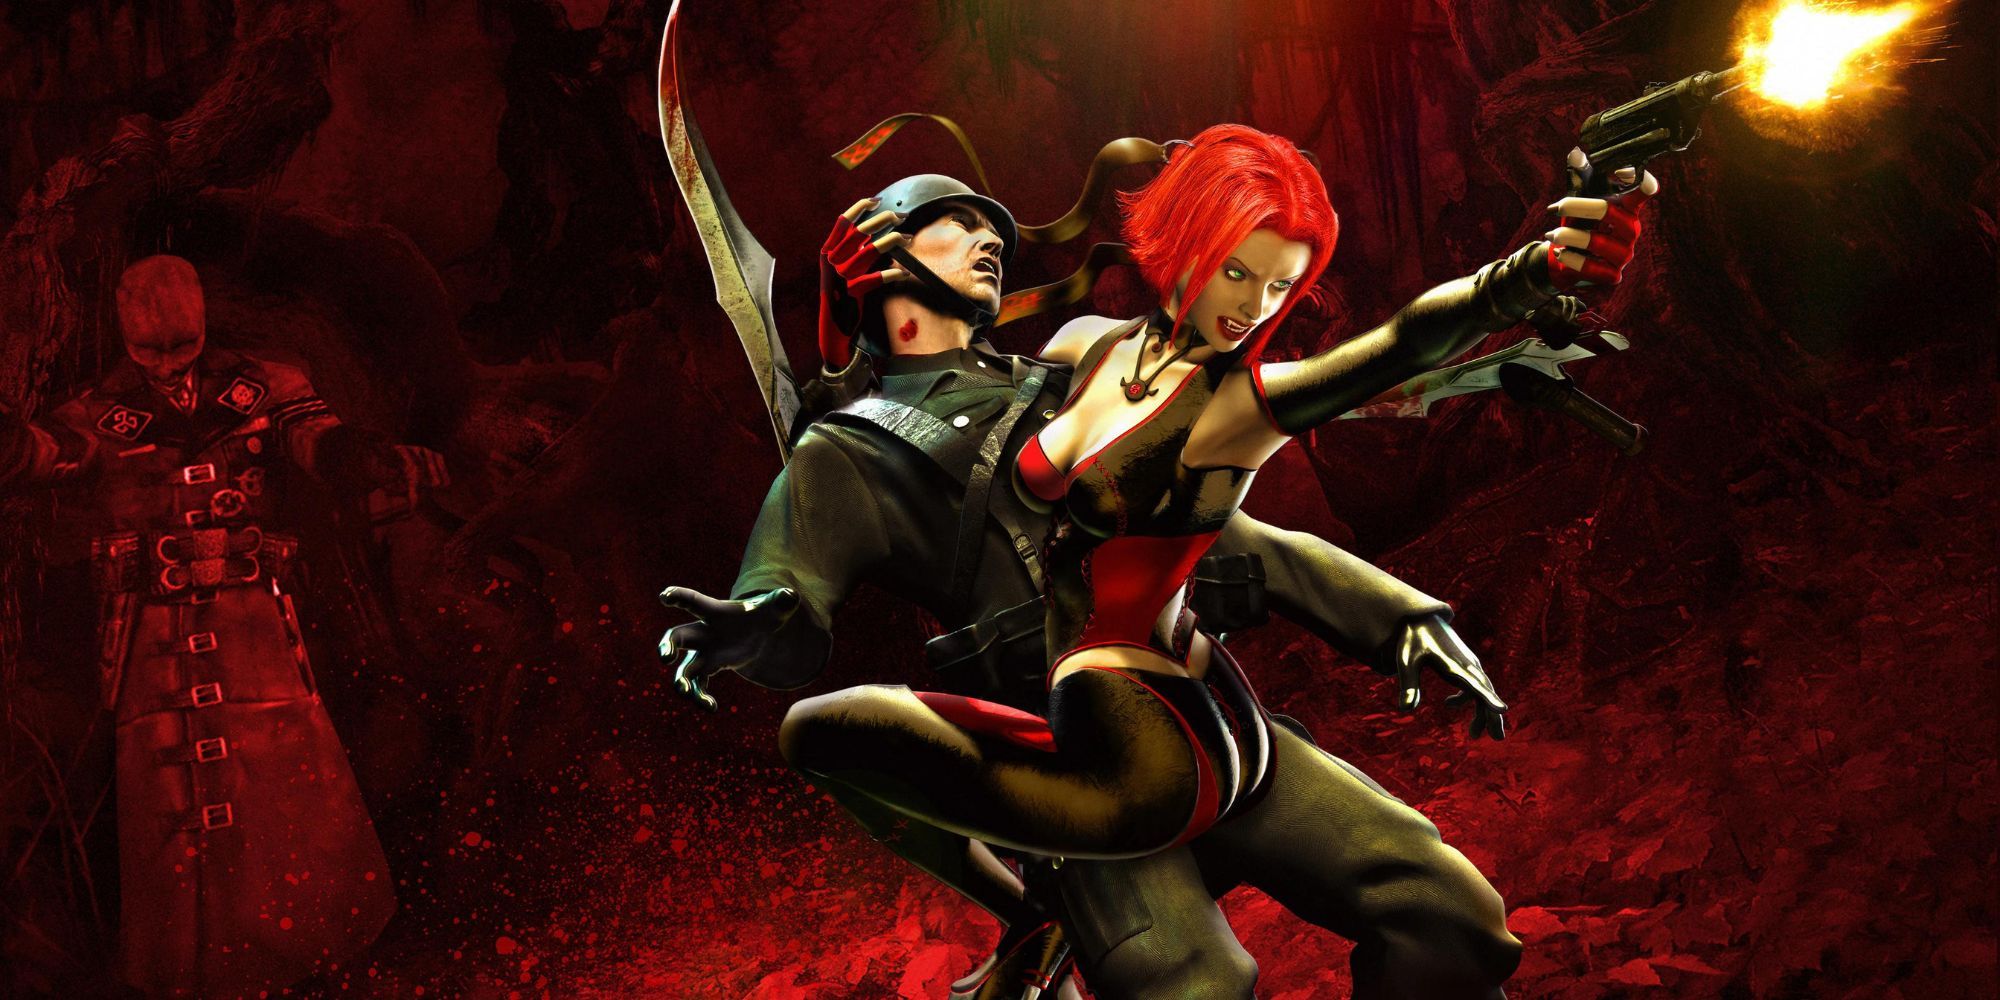 Rayne fires while holding a soldier in BloodRayne